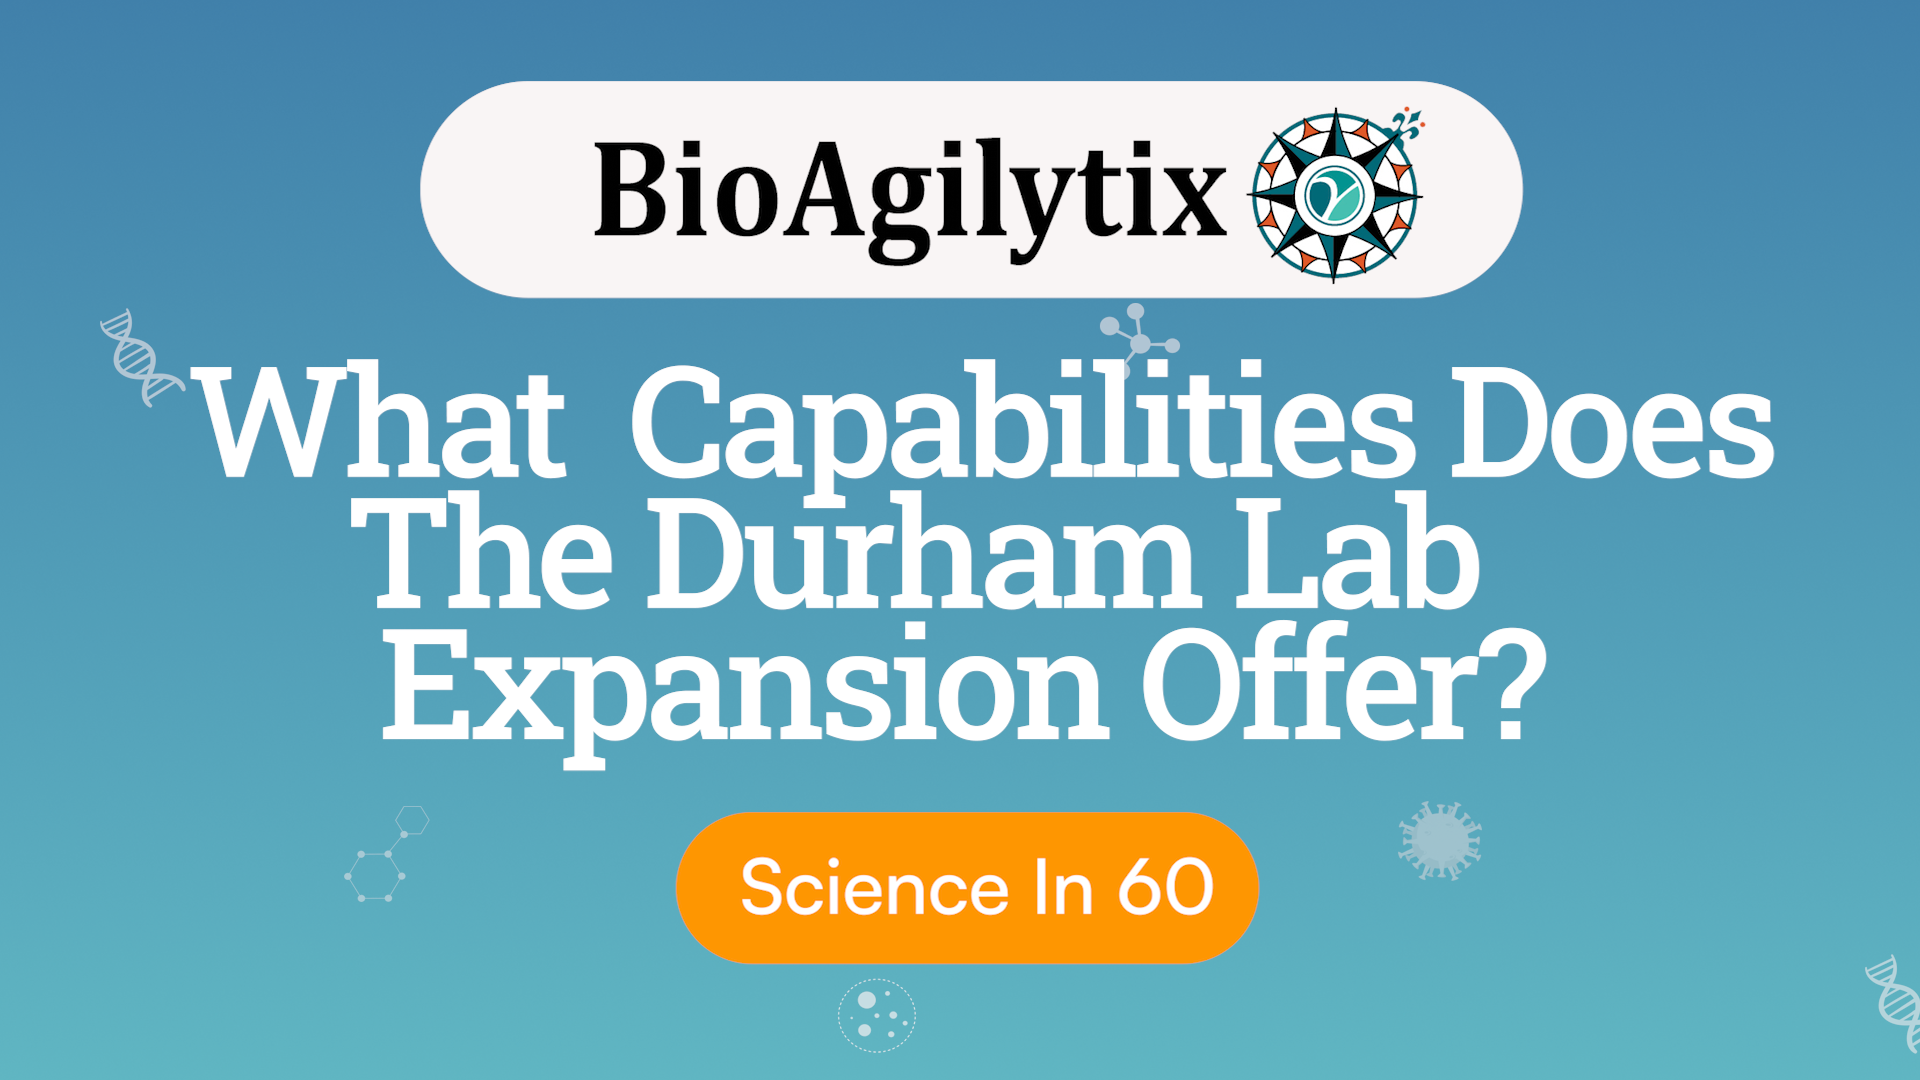 What Capabilities Does The Durham Lab Expansion Offer?